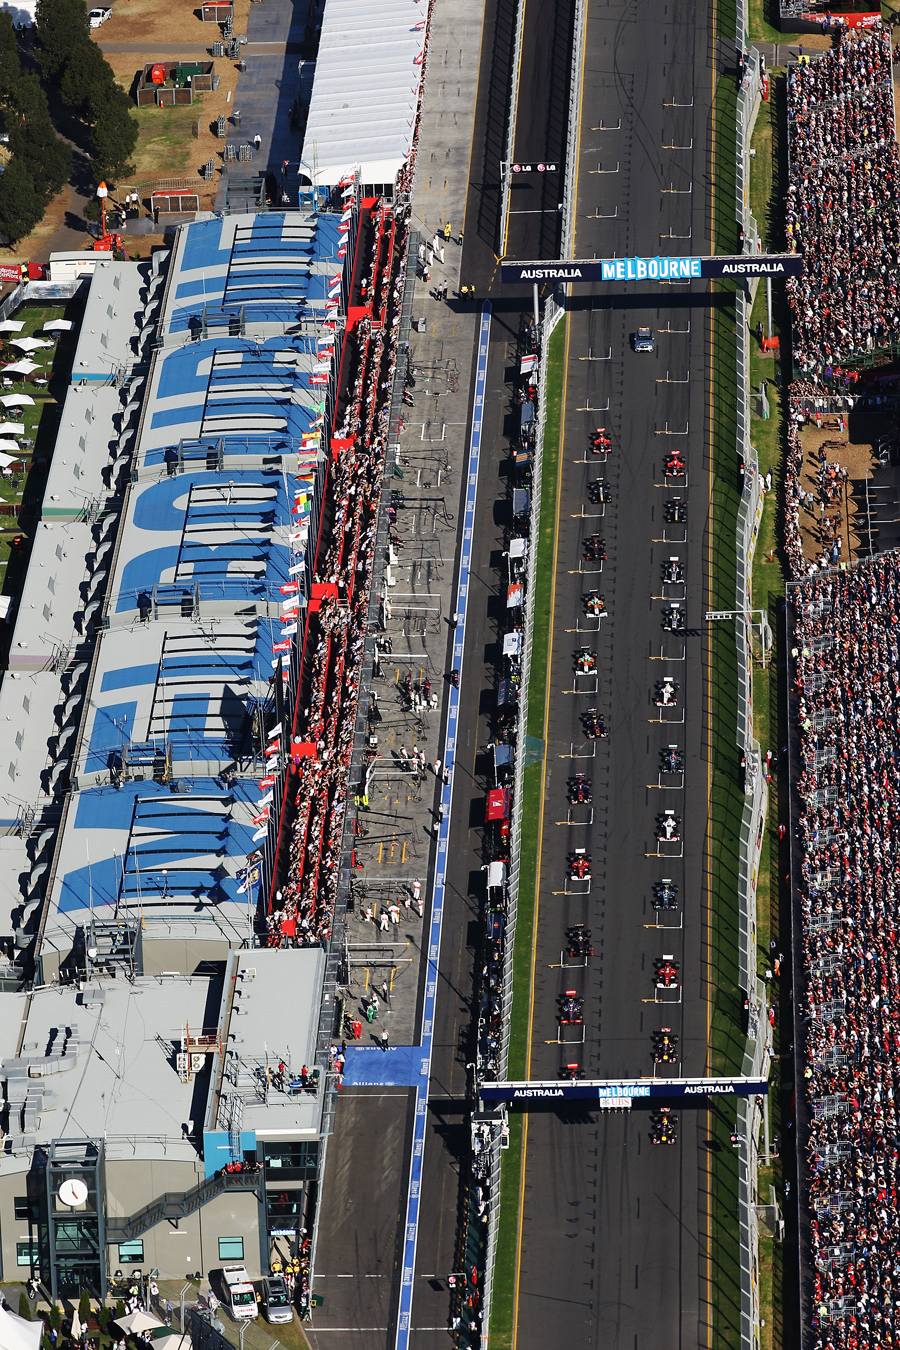 An overhead view as Sebastian Vettel leads the field off the line